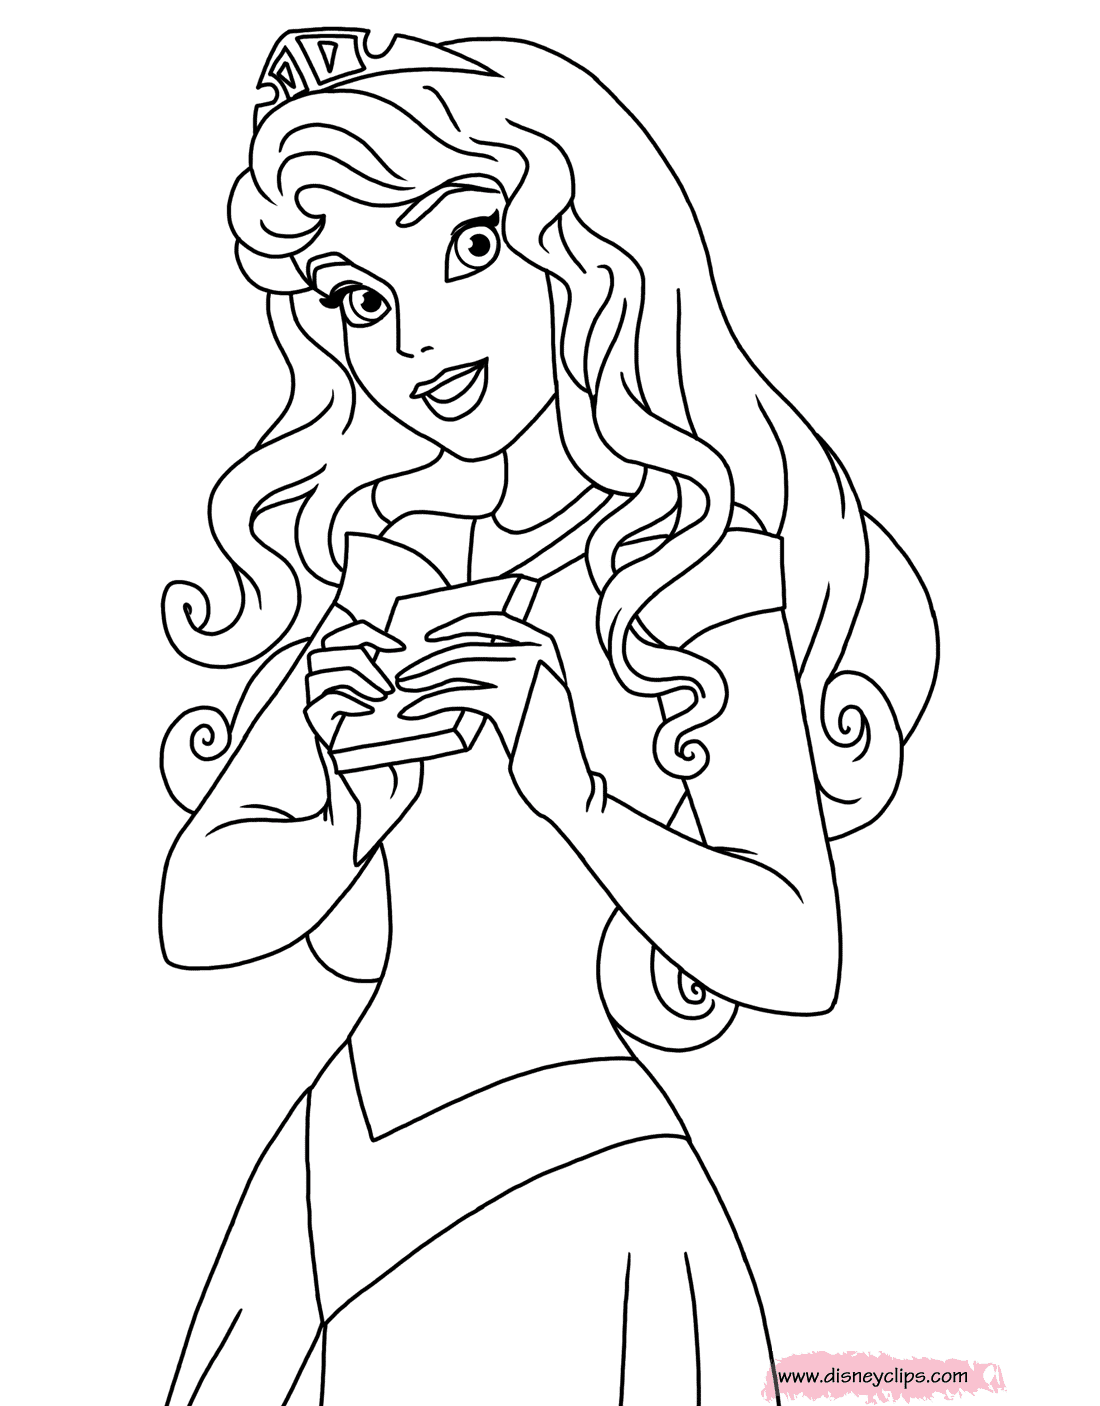 Aurora holding a book Coloring Pages